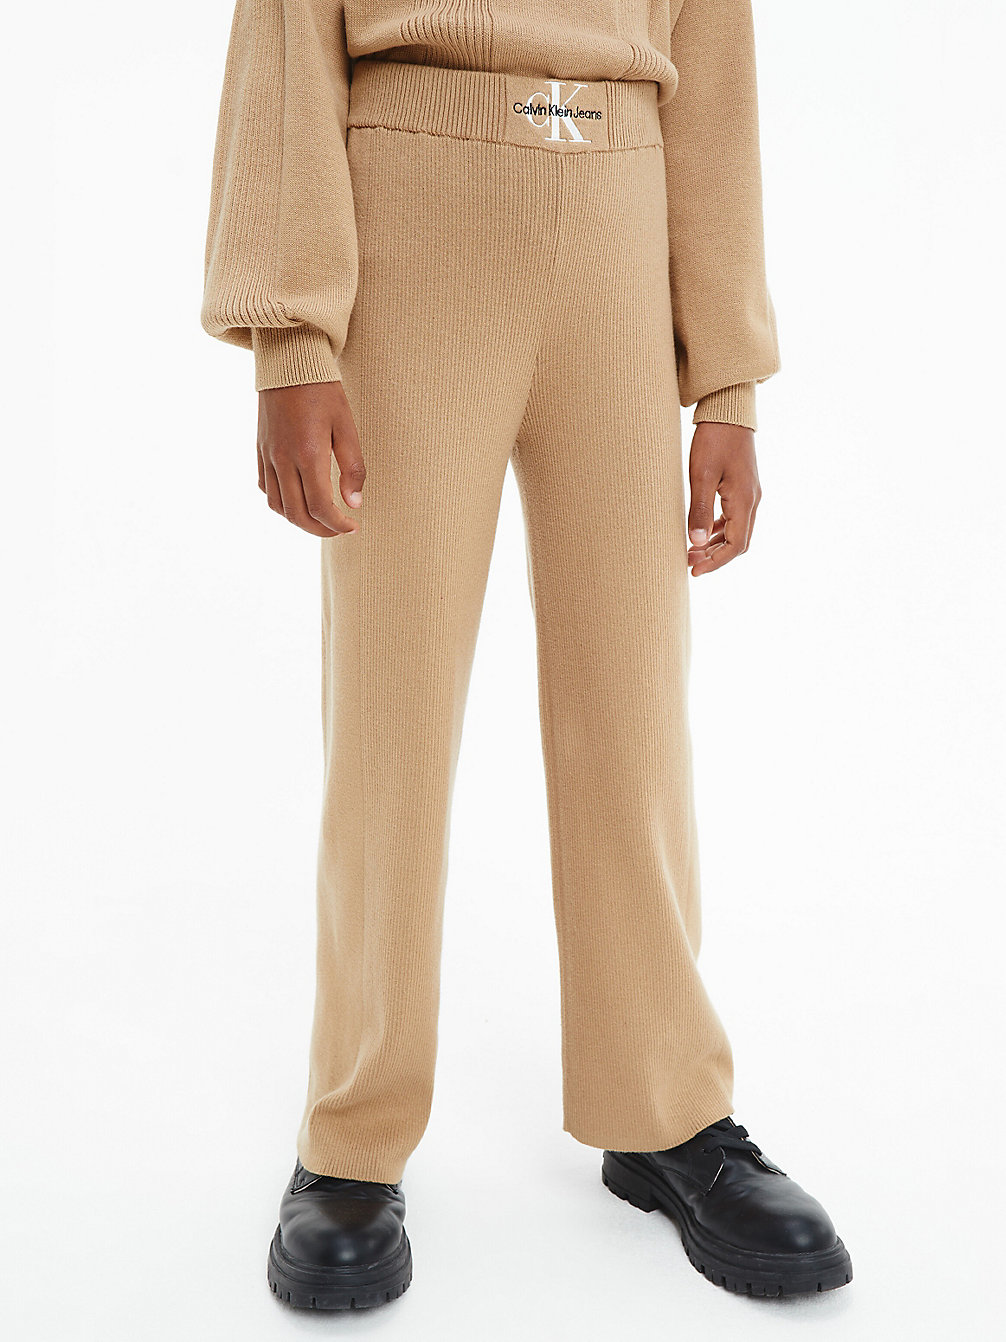 TIMELESS CAMEL Pantaloni A Costine In Cotone Biologico undefined girls Calvin Klein